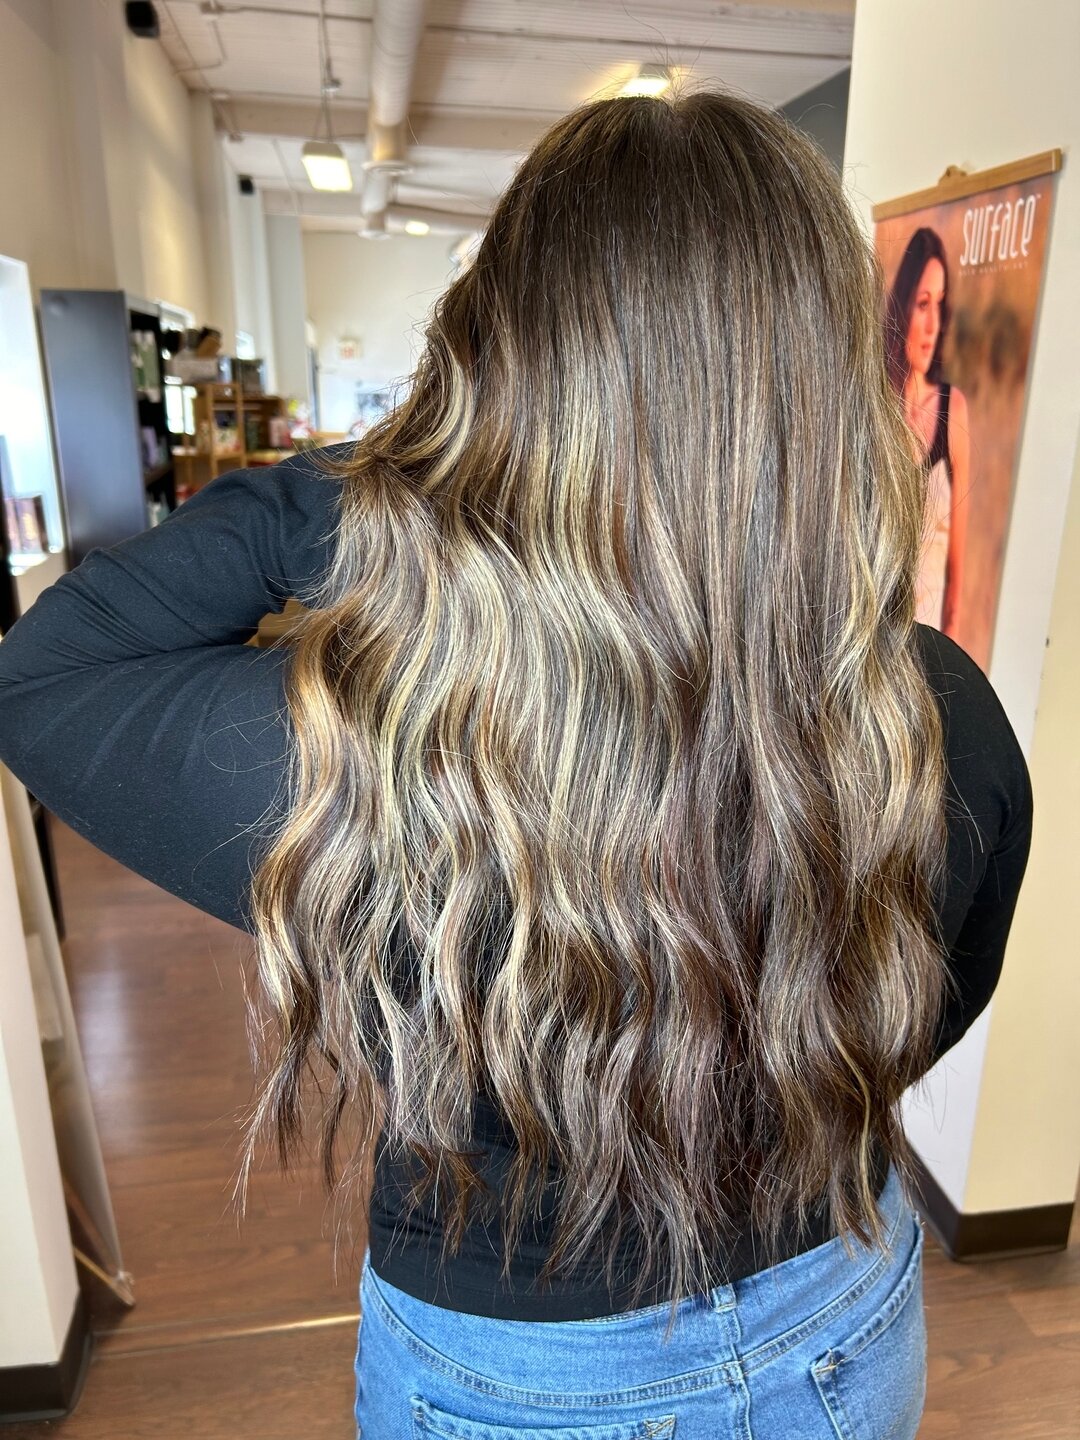 Waves for days 🤩 by @brookemeulenbelthair